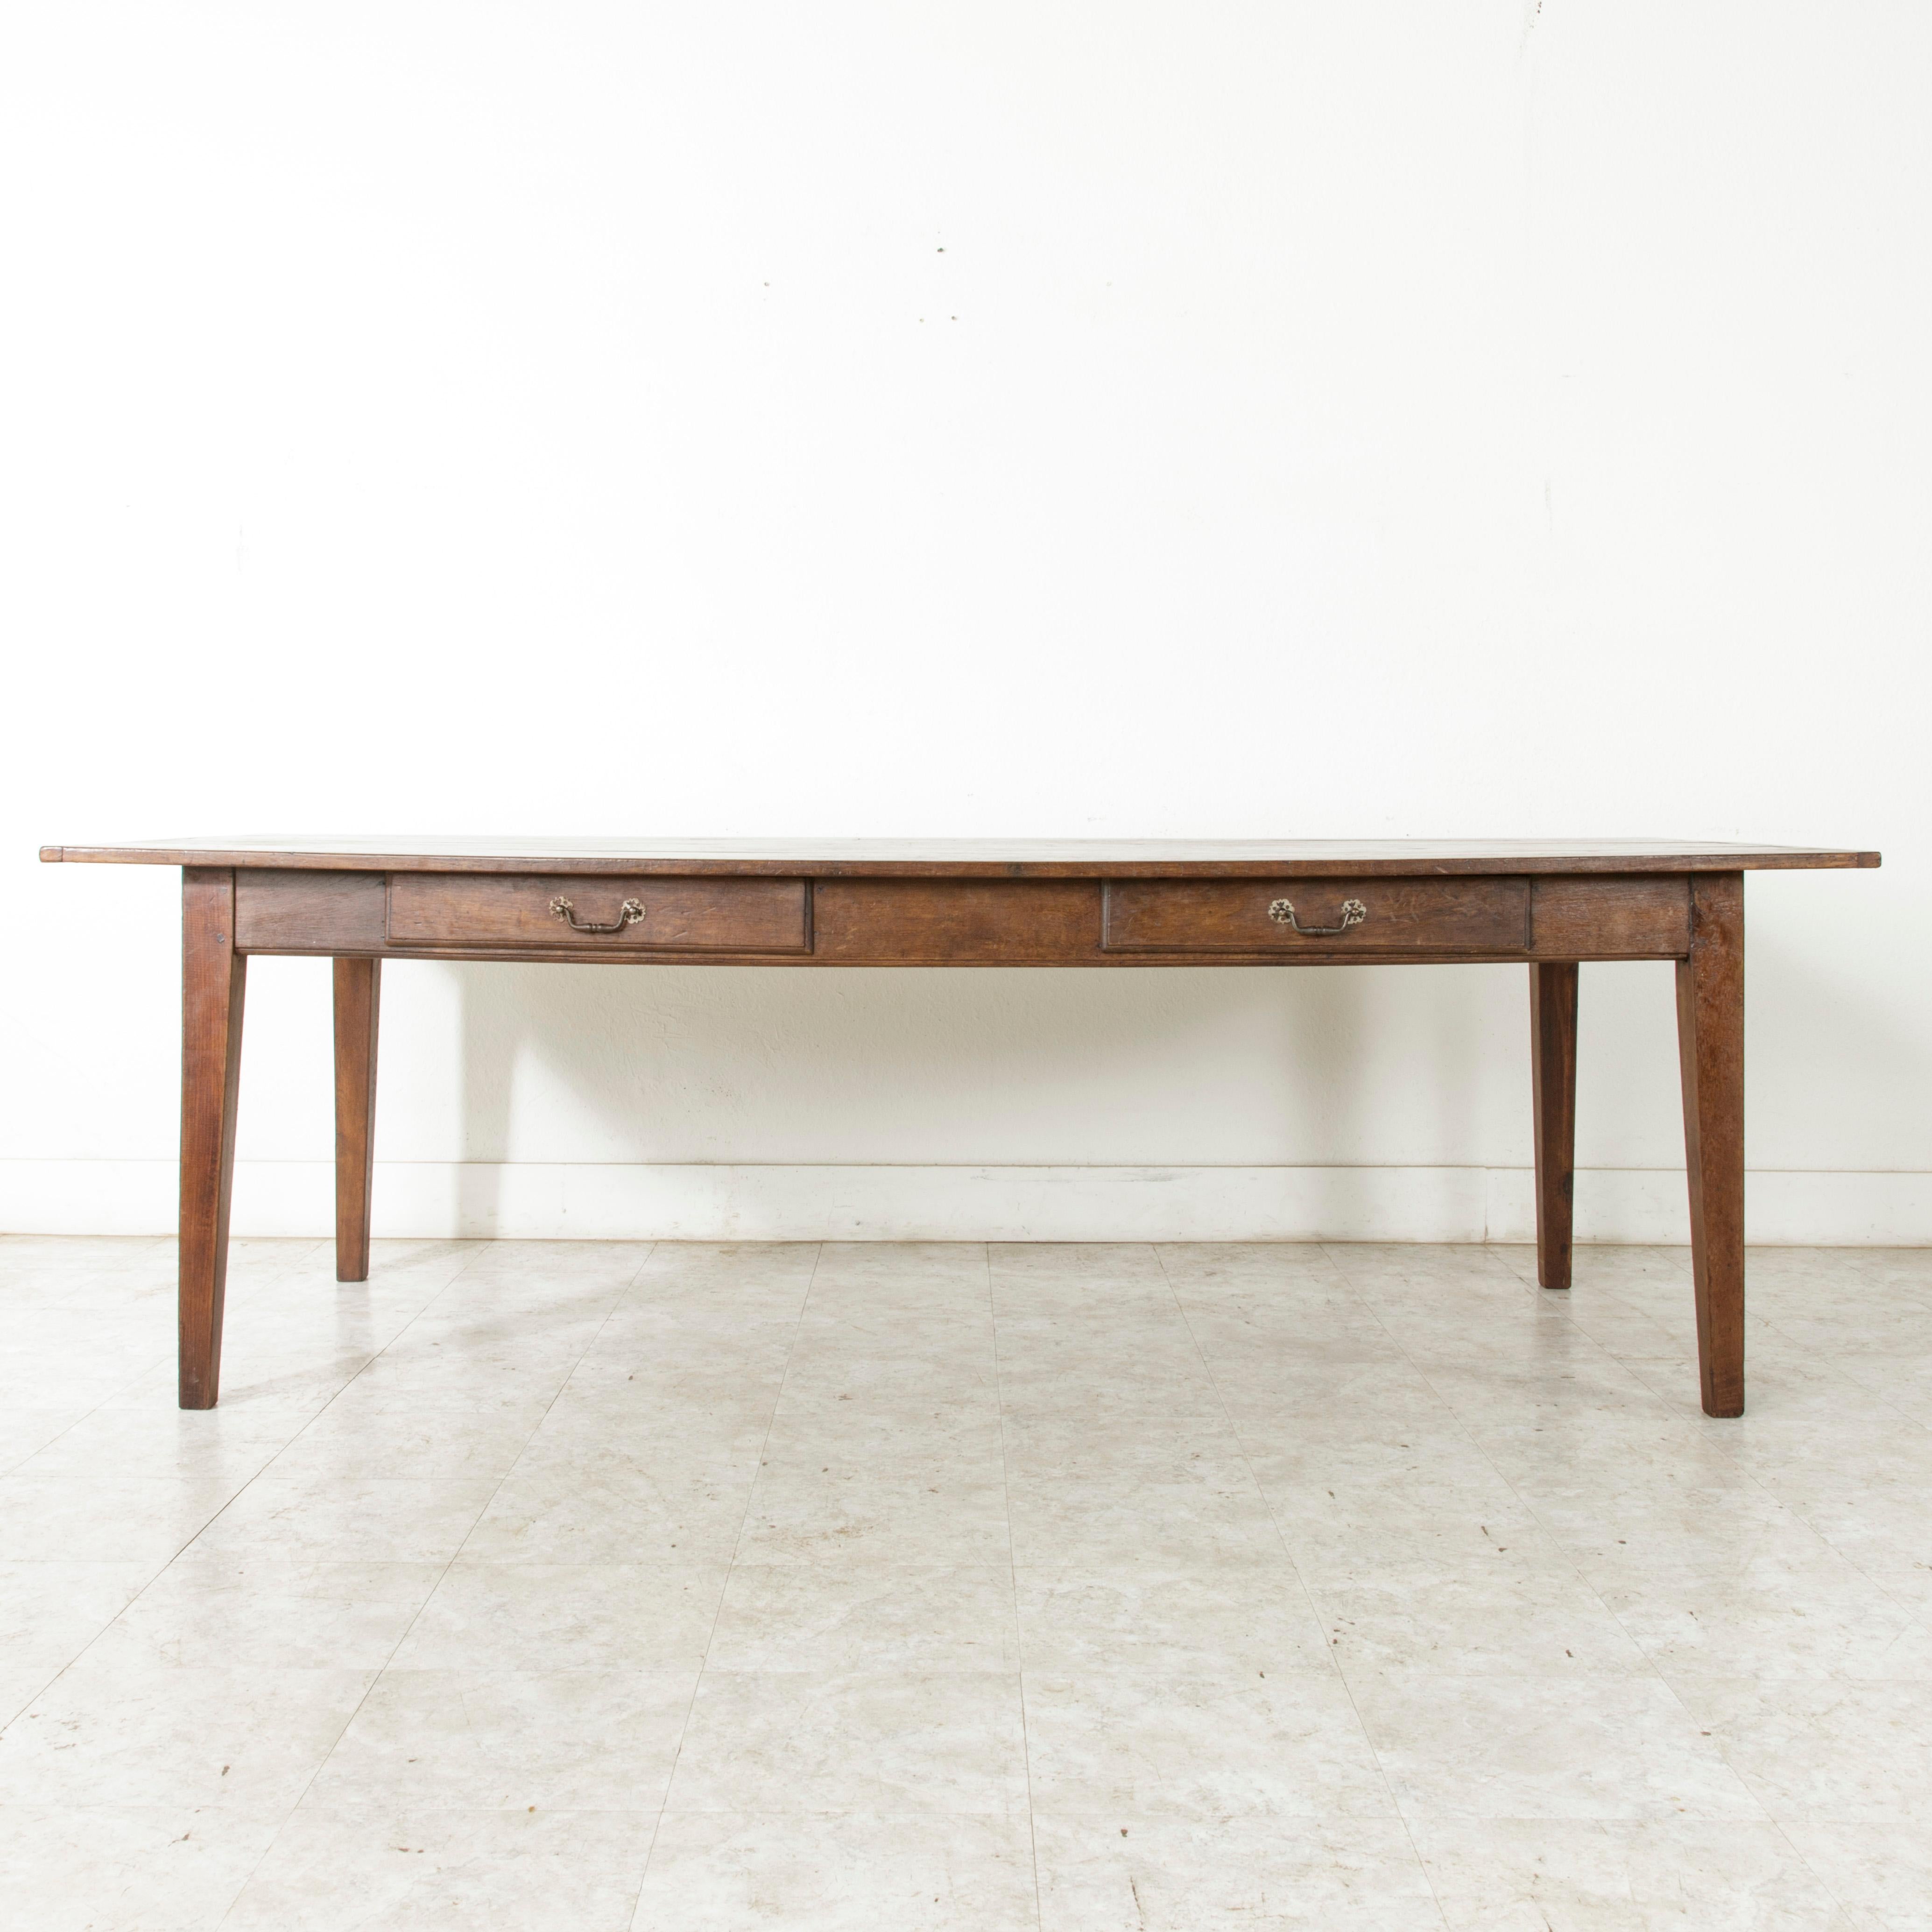 Rustic Long French Oak Farm Table or Dining Table with Two Drawers, circa 1900 